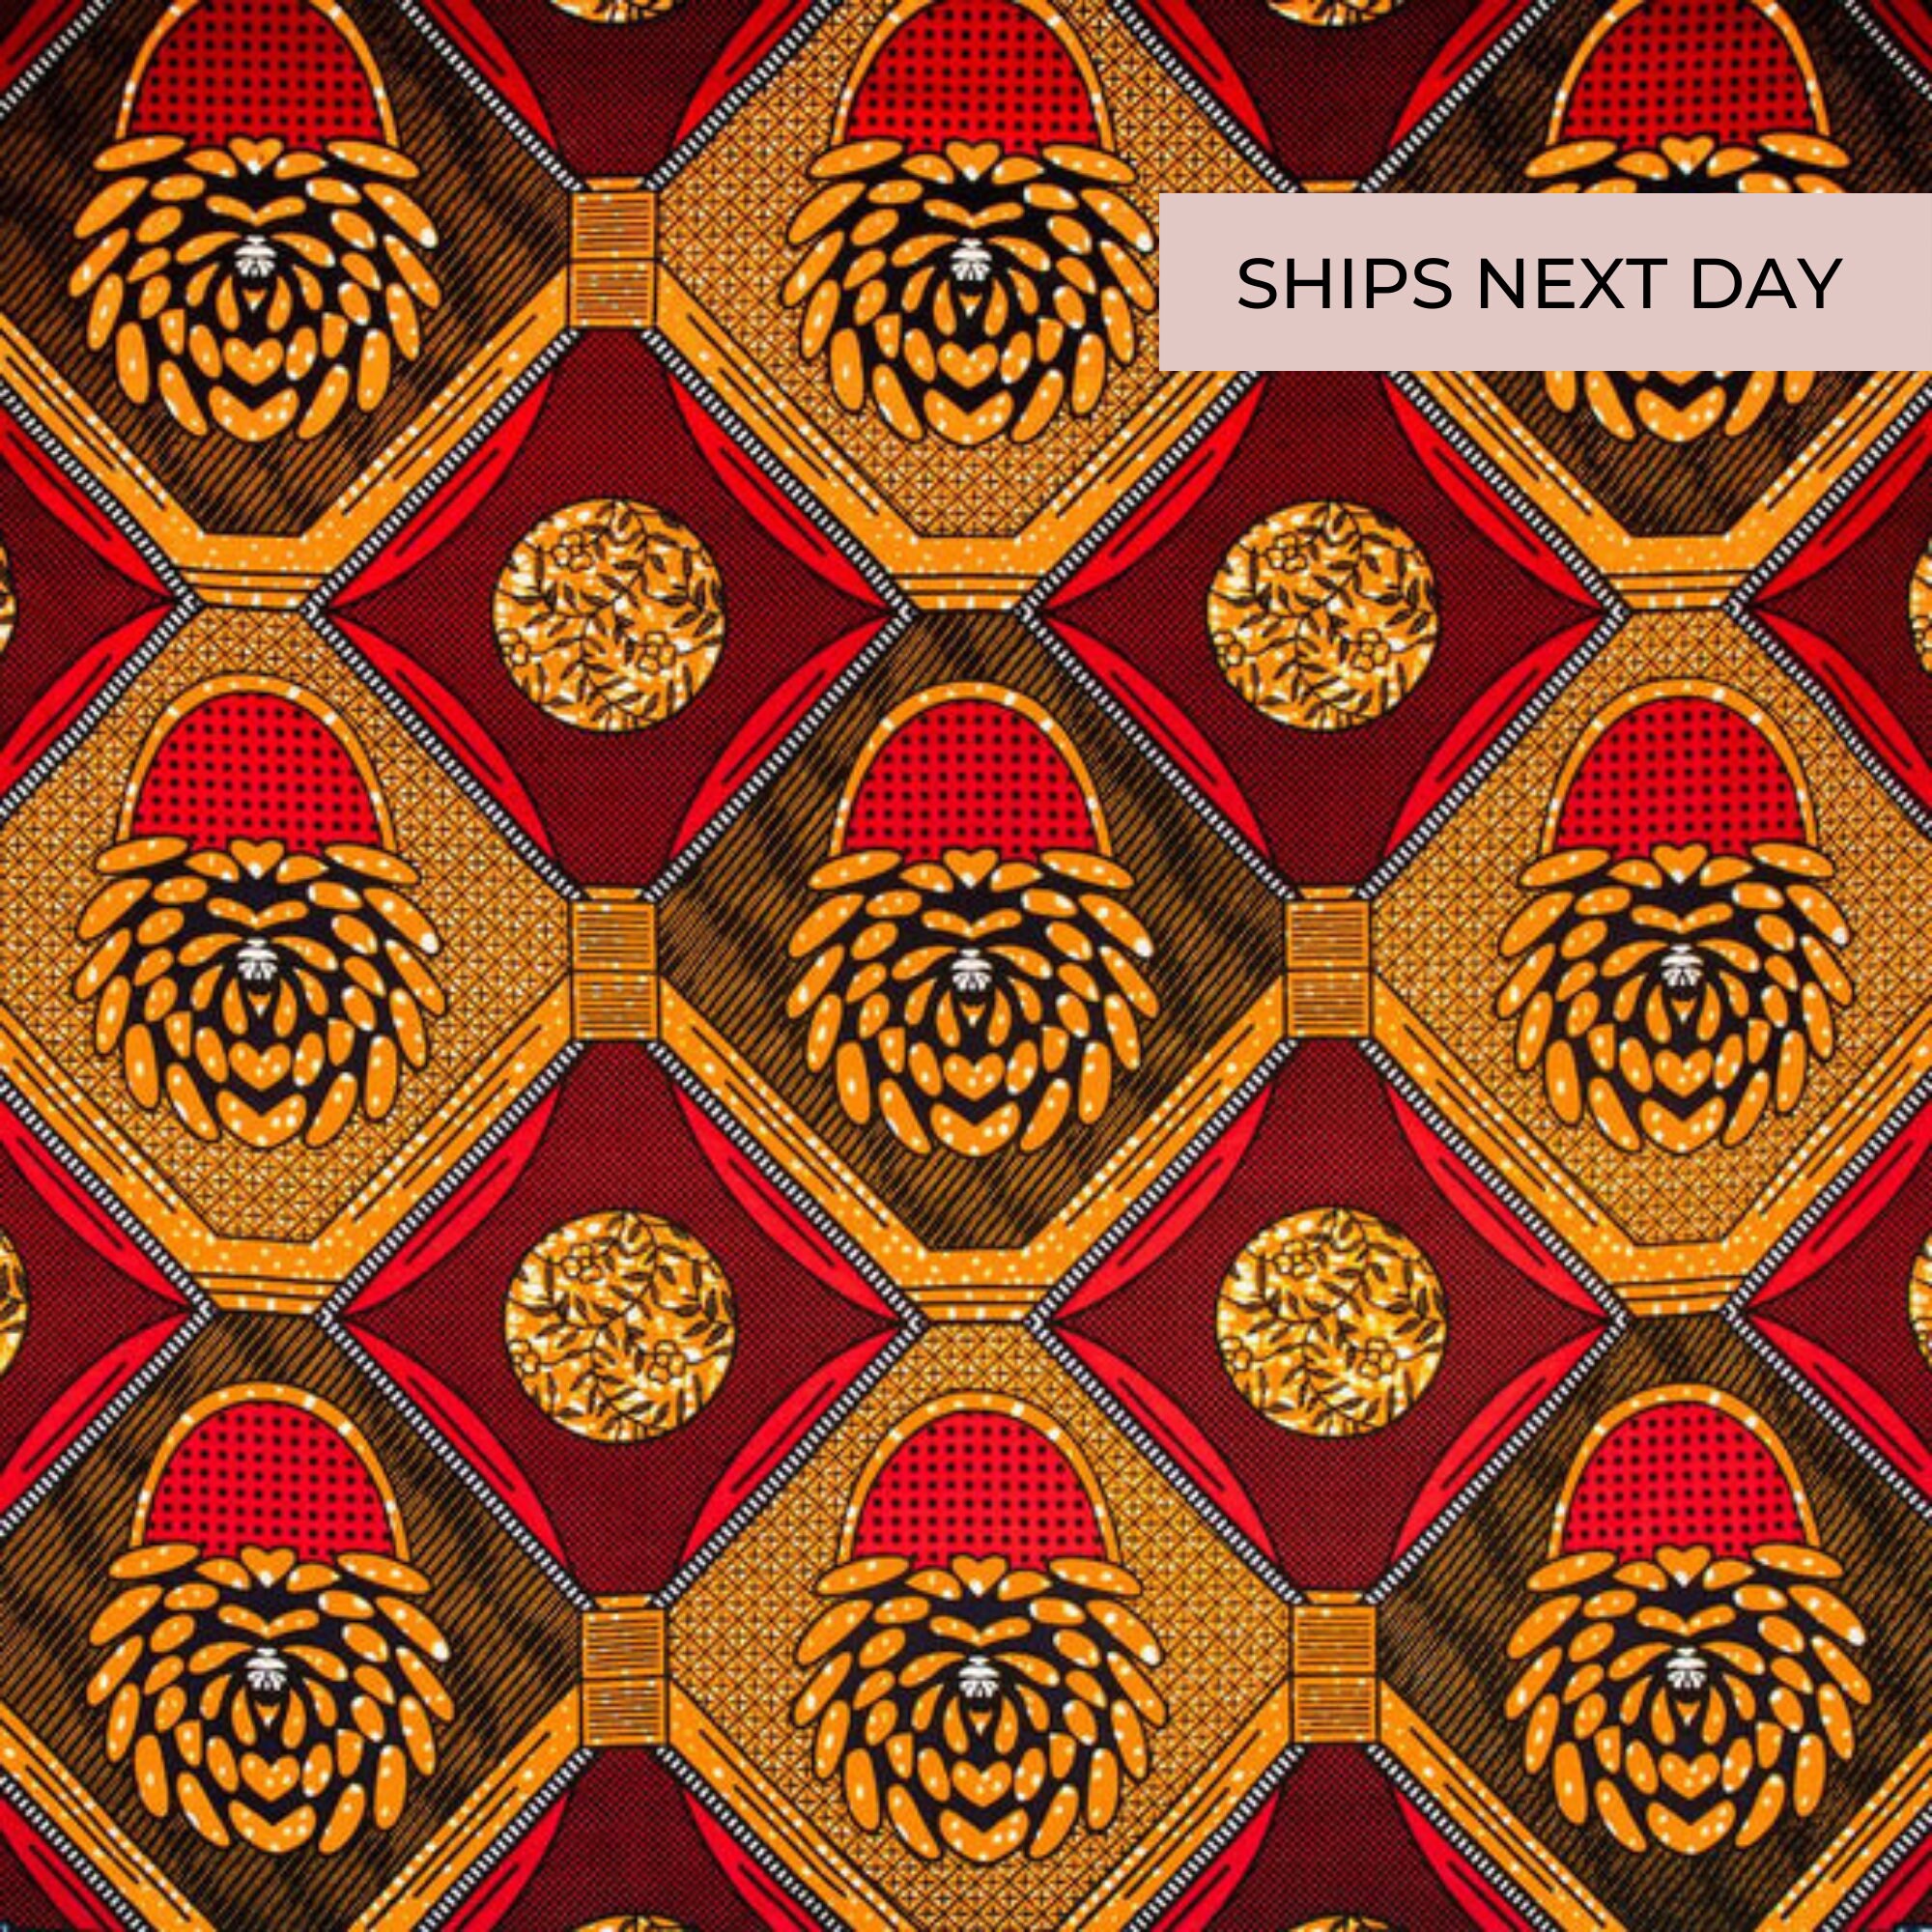 Art Nouveau Floral African Print Fabric / 100% Cotton / Black History Month  Fabric / Red, Orange, White & Black African Print Fabric -  Canada